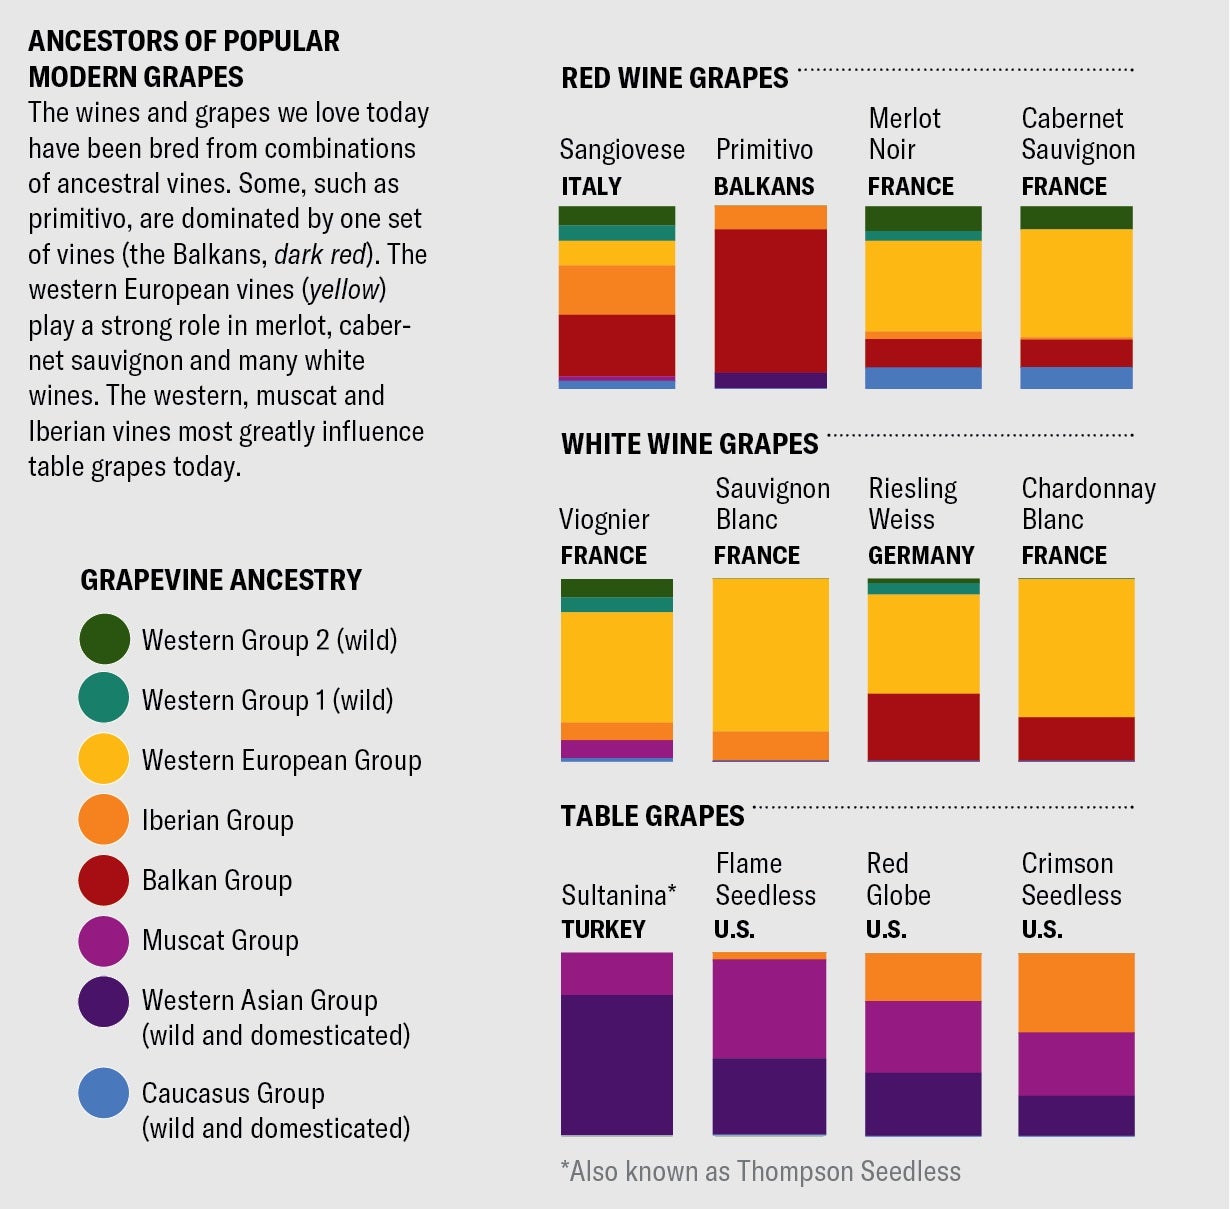 Stacked bar charts show the ancestral makeup of 12 popular modern wine and table grapes. Some, such as primitivo, are dominated by one set of vines (the Balkan group). The western European vines play a strong role in merlot, cabernet sauvignon and many white wines.